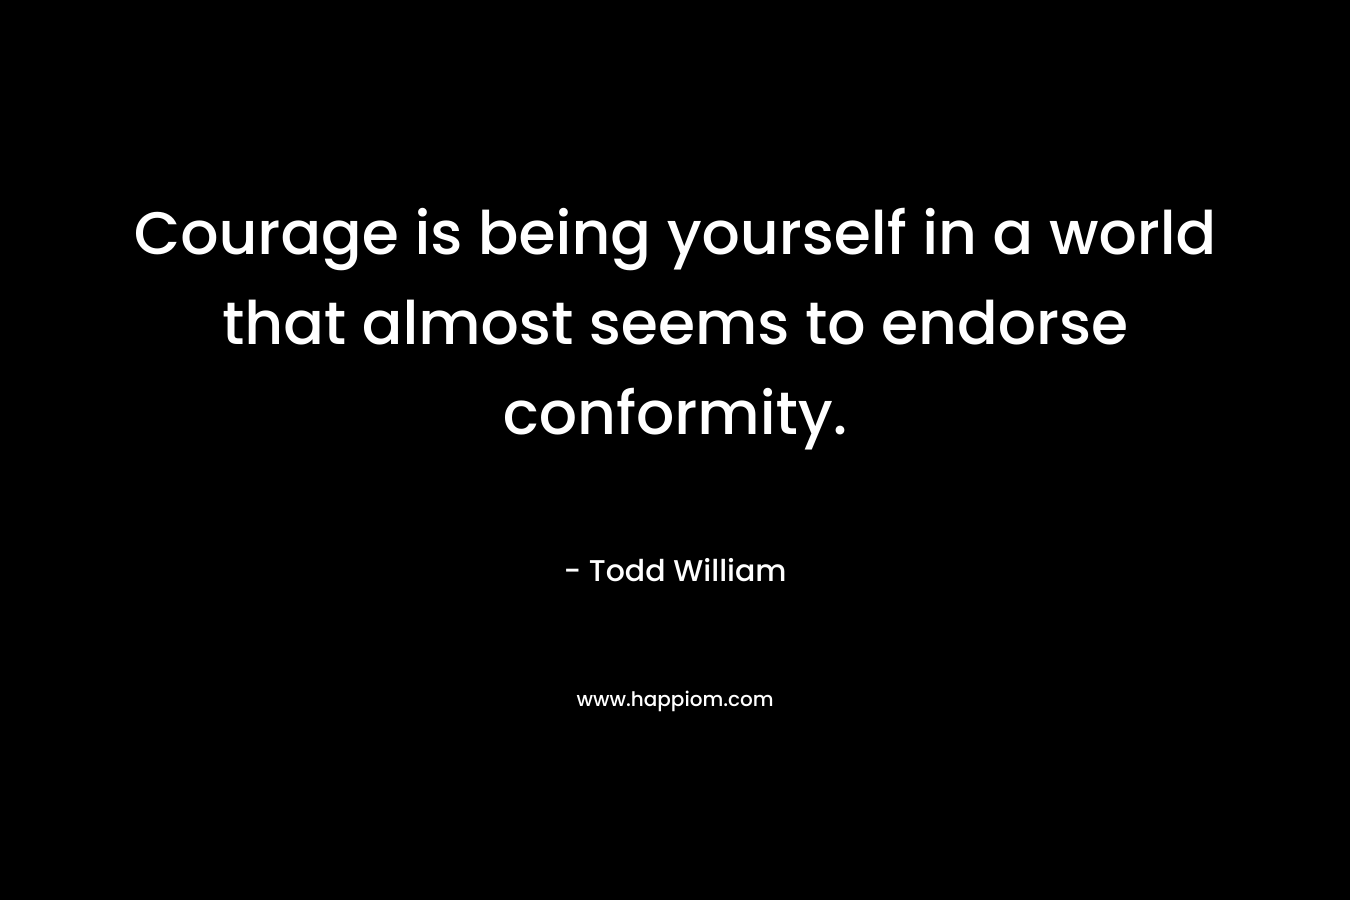 Courage is being yourself in a world that almost seems to endorse conformity. – Todd William